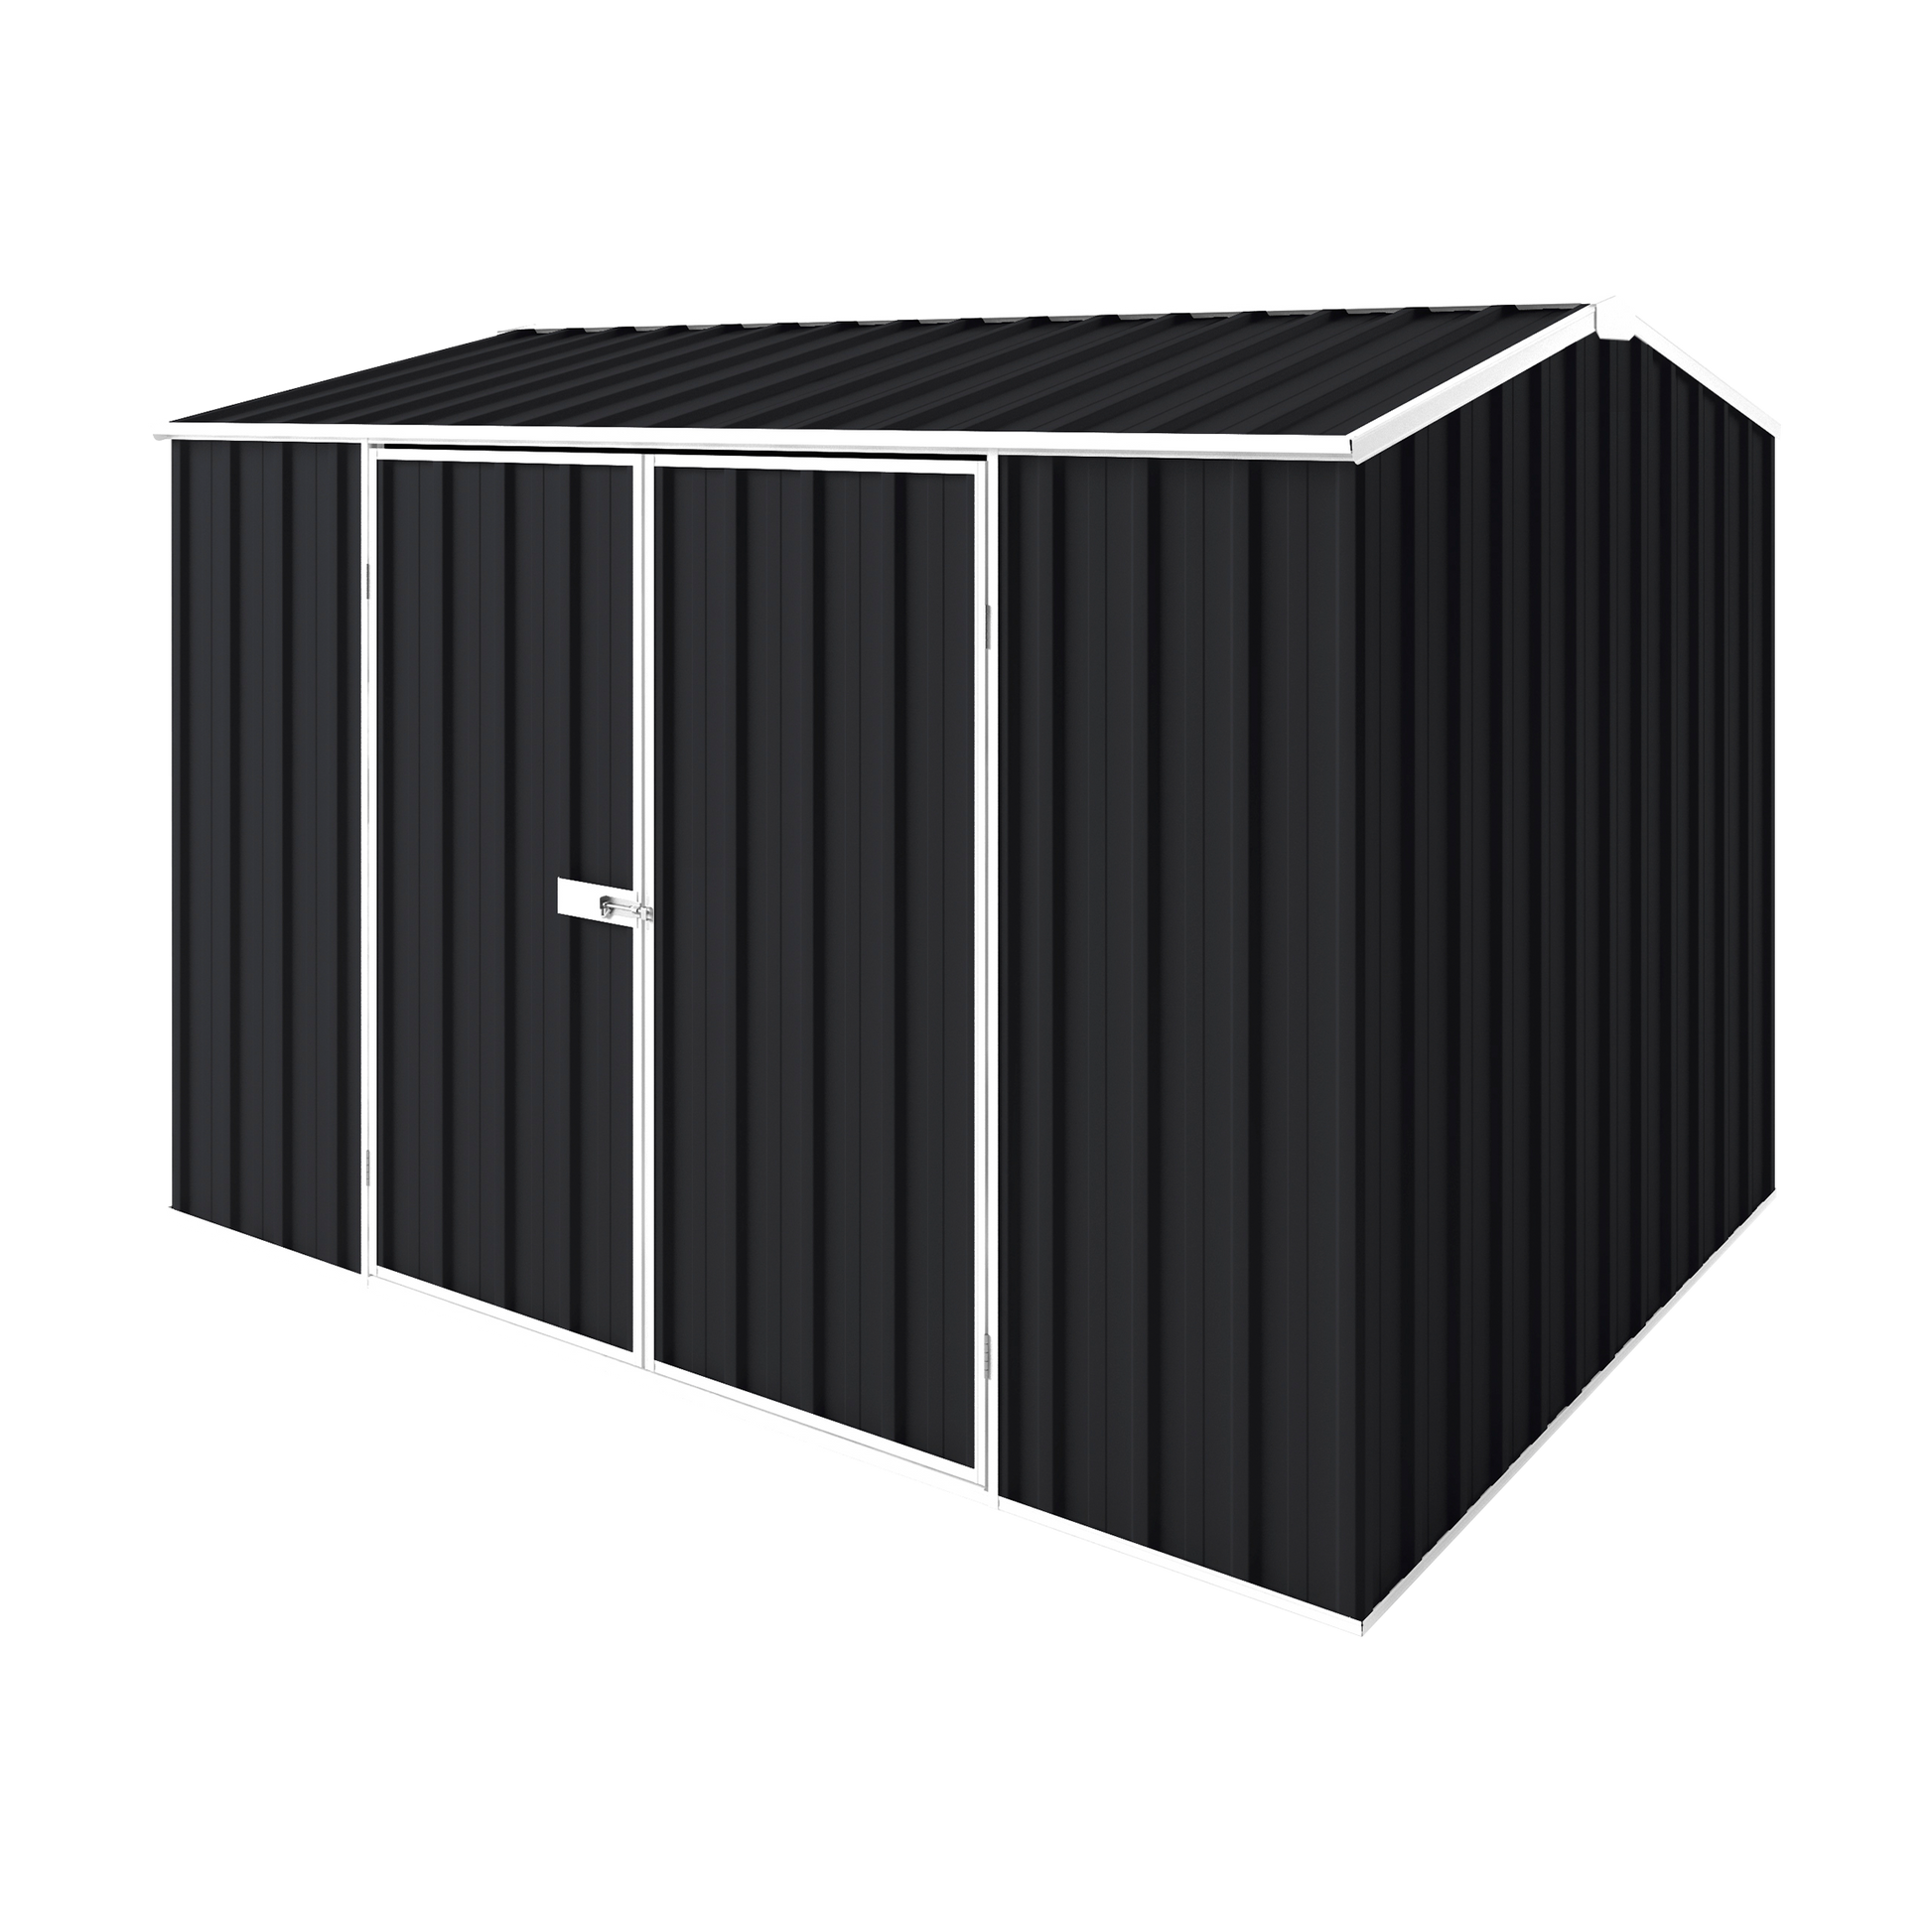 3m x 2.25m Gable Roof Garden Shed - EasyShed